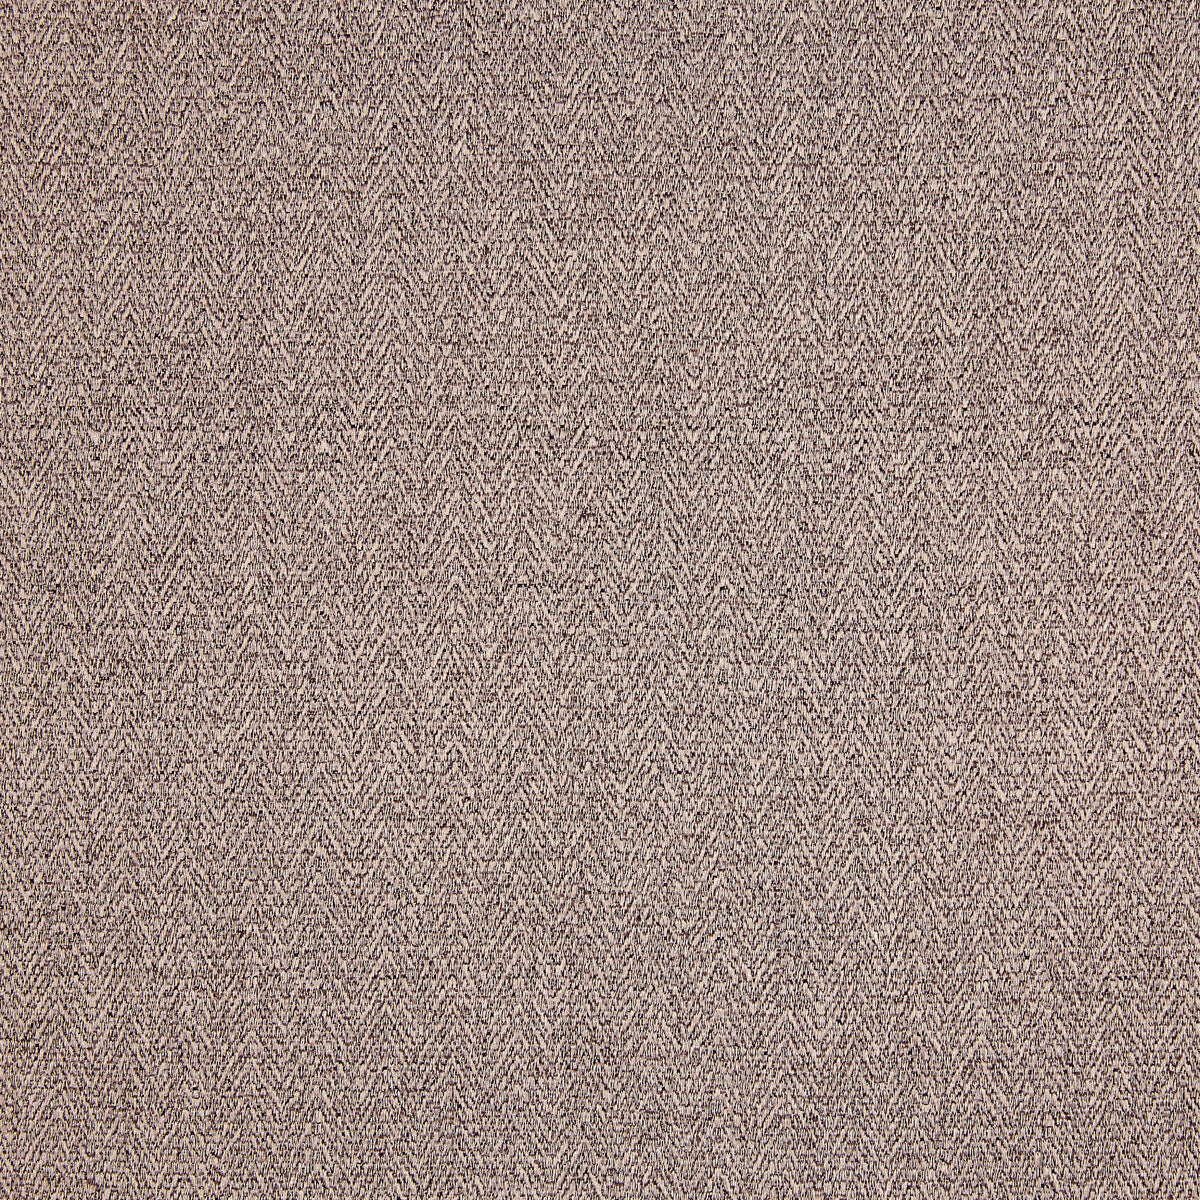 Brummell fabric in 2 color - pattern LZ-30363.02.0 - by Kravet Design in the Lizzo collection